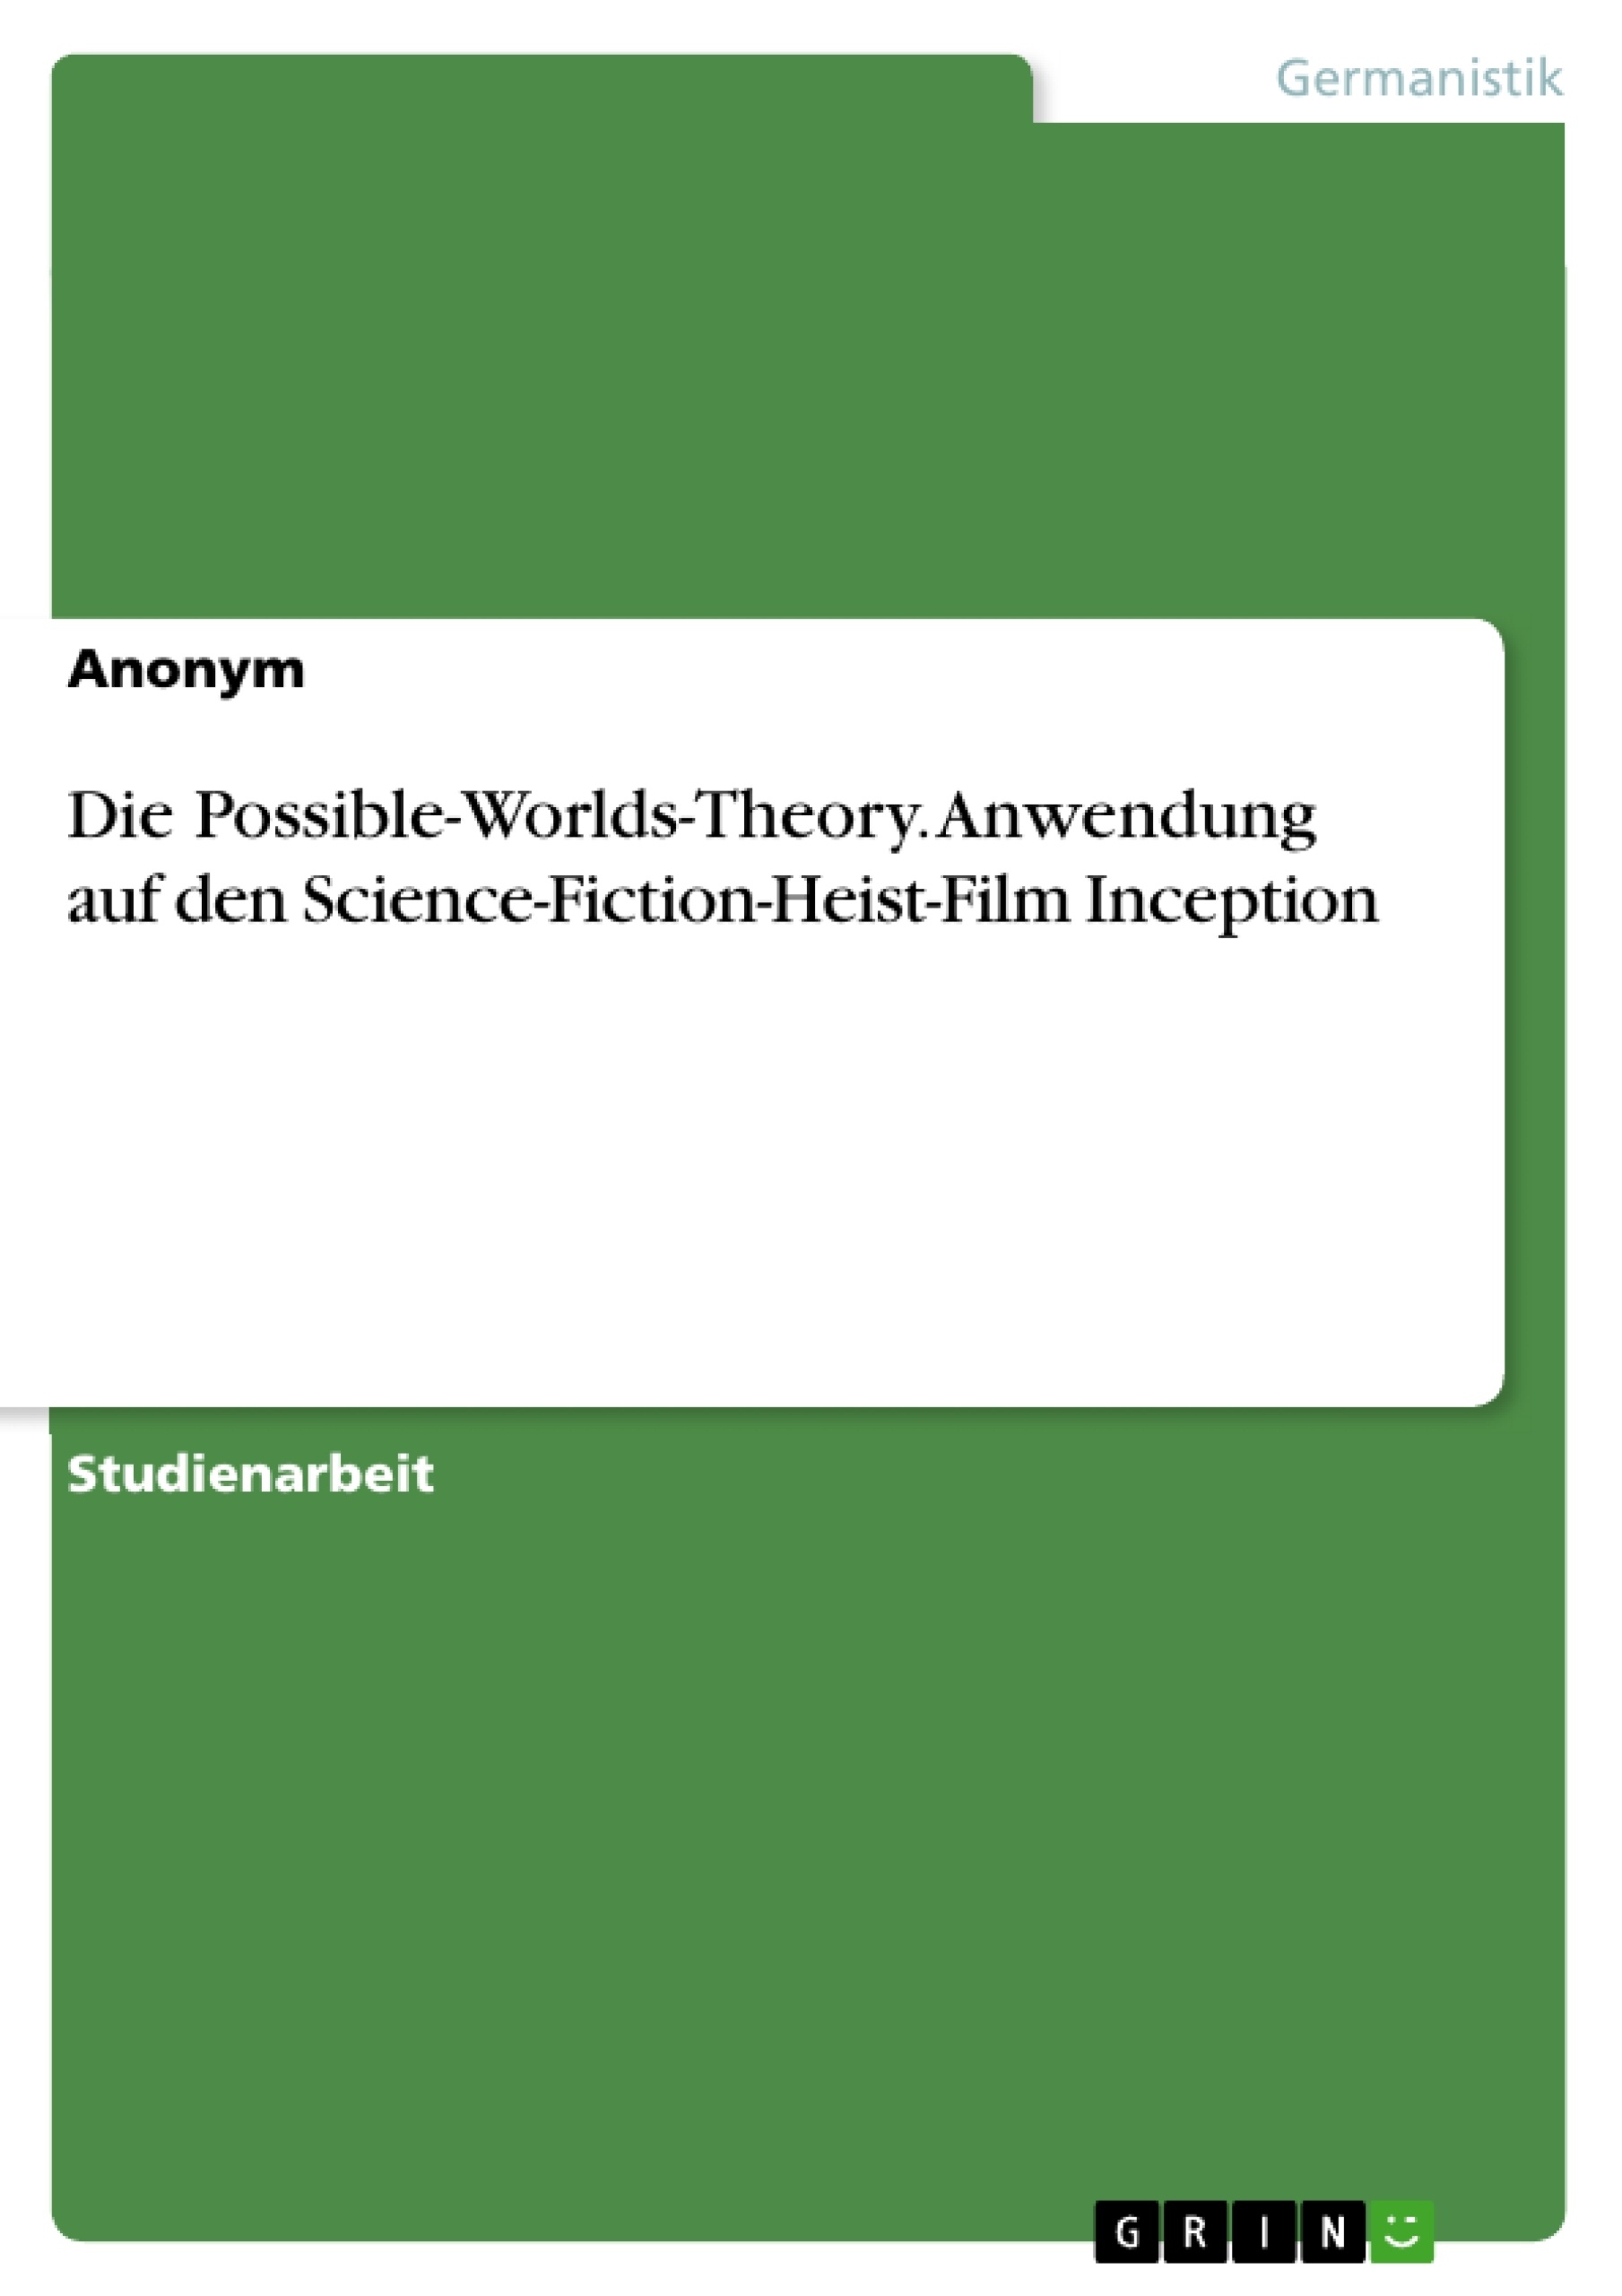 Título: Die Possible-Worlds-Theory. Anwendung auf den Science-Fiction-Heist-Film Inception